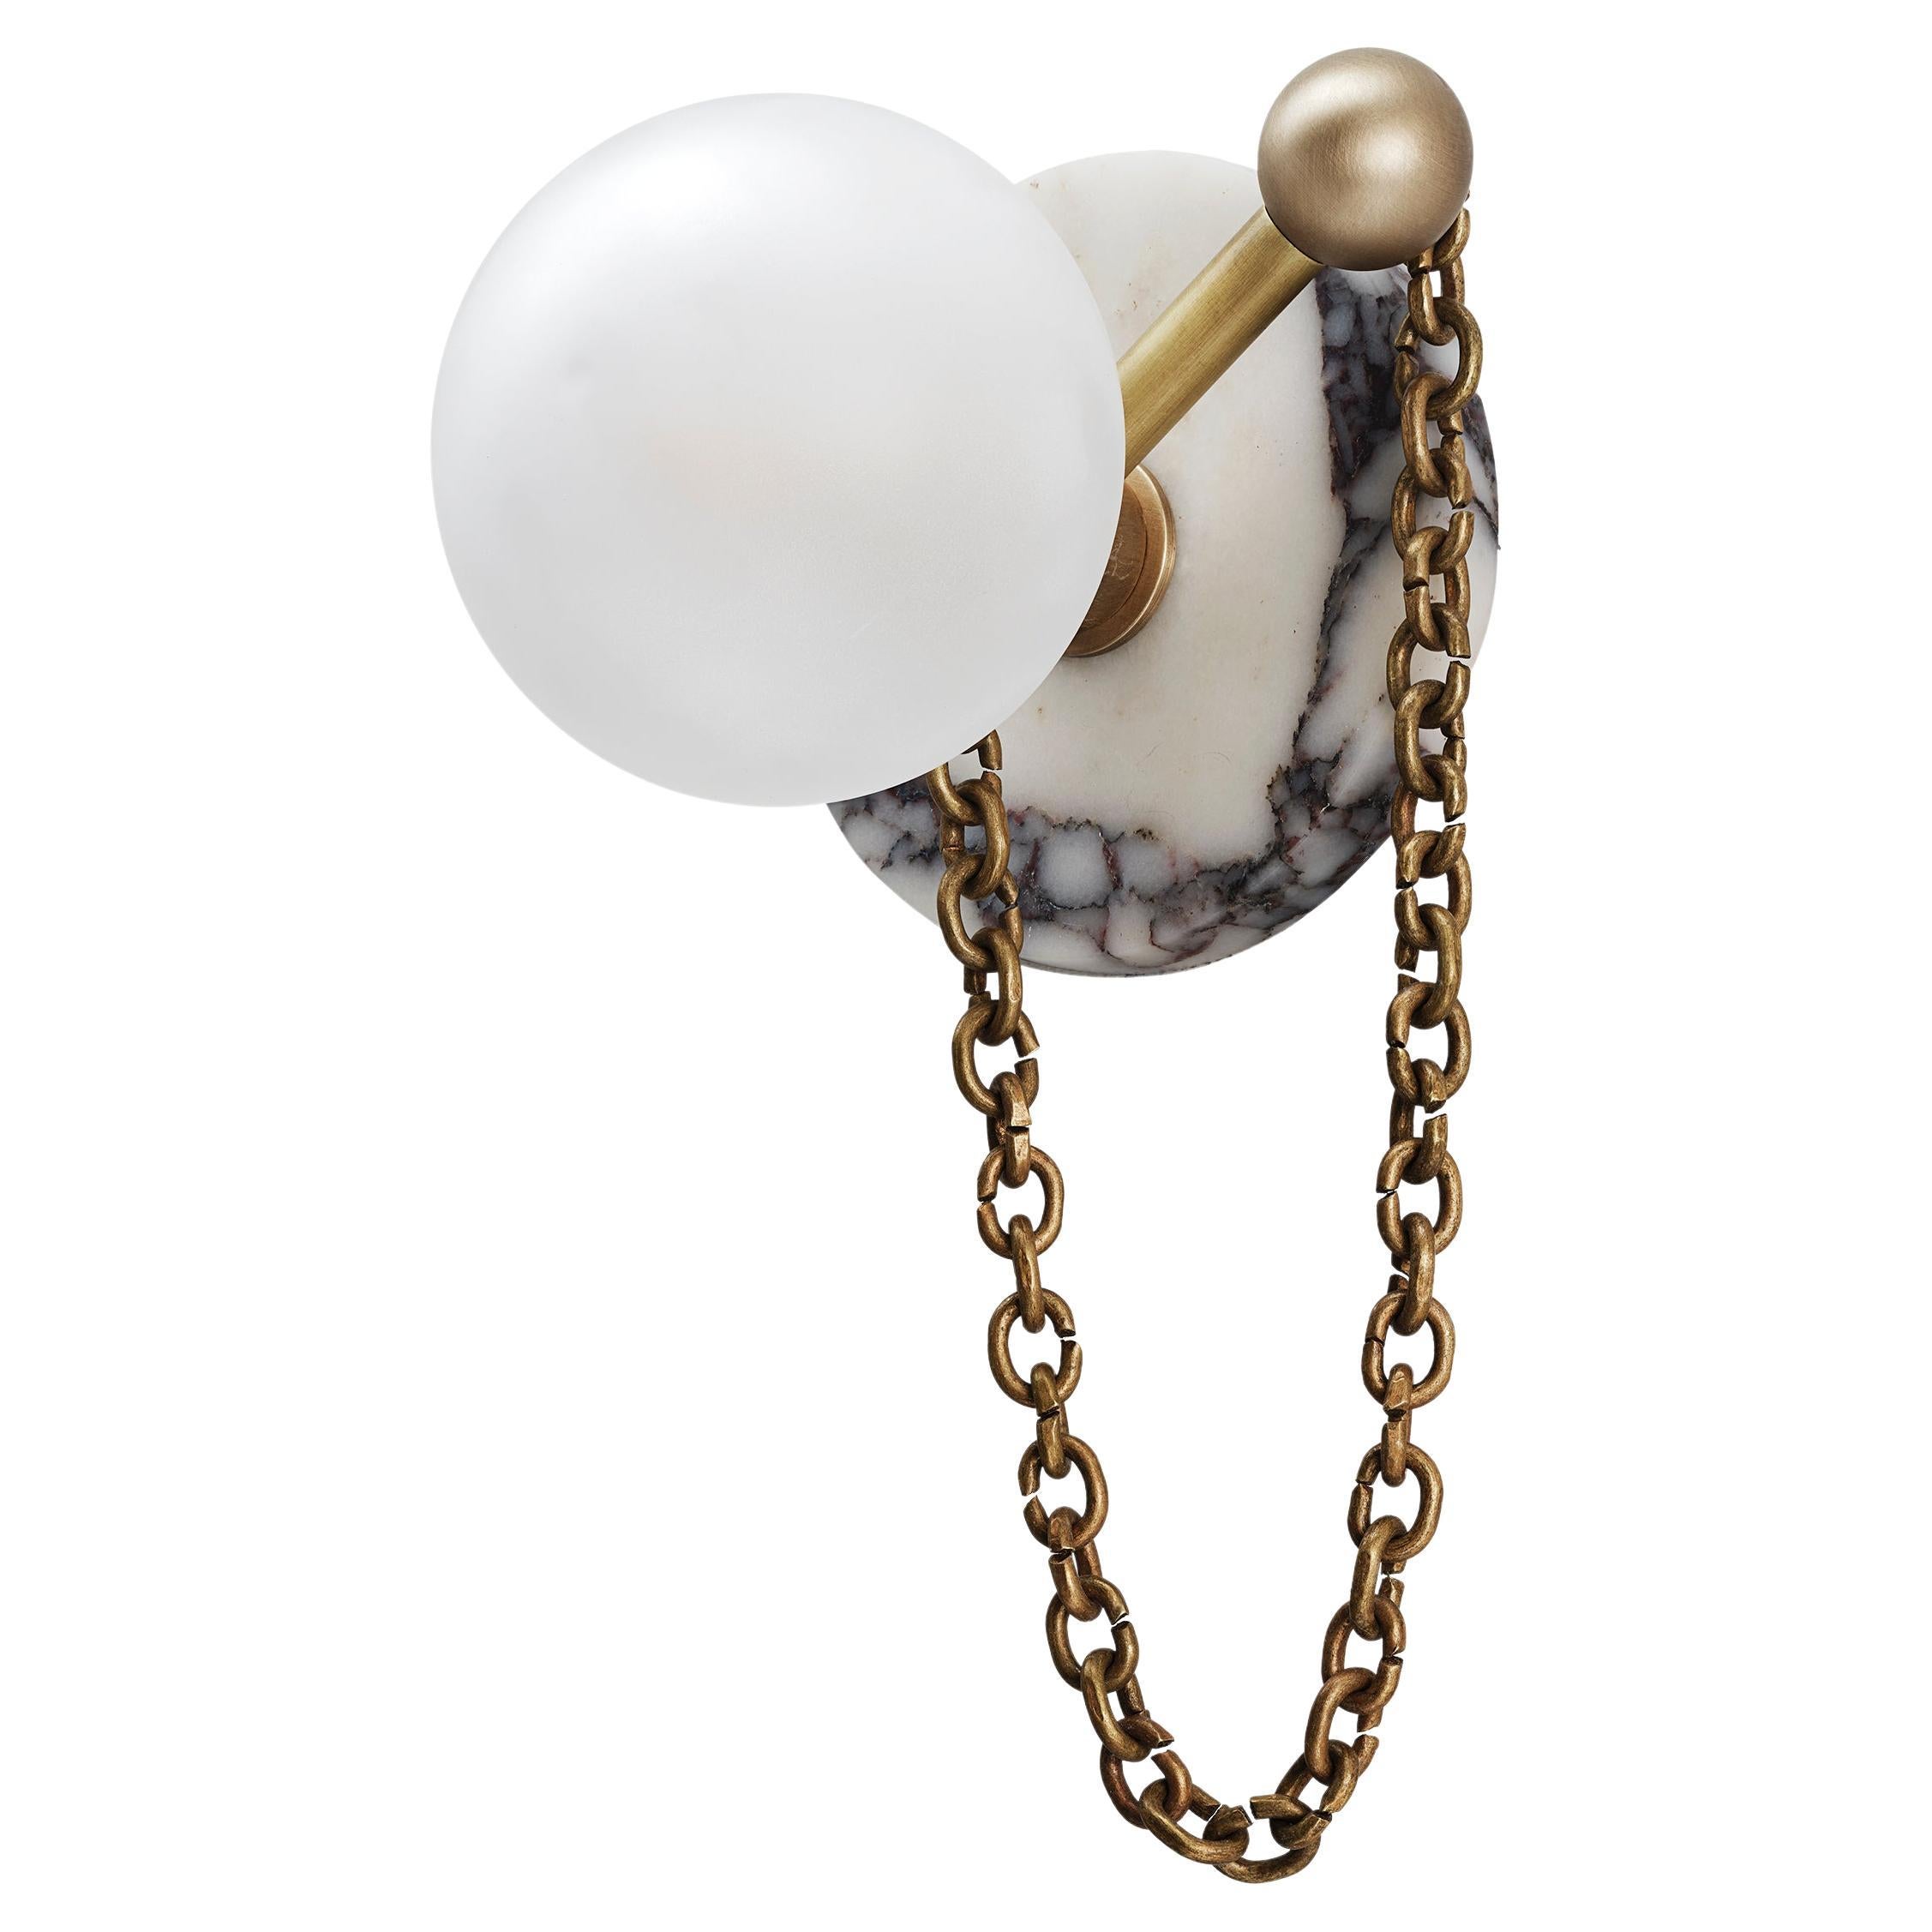 ALLA Wall Sconce Calacatta Marble & Glass, Emily Del Bello x Blueprint Lighting For Sale